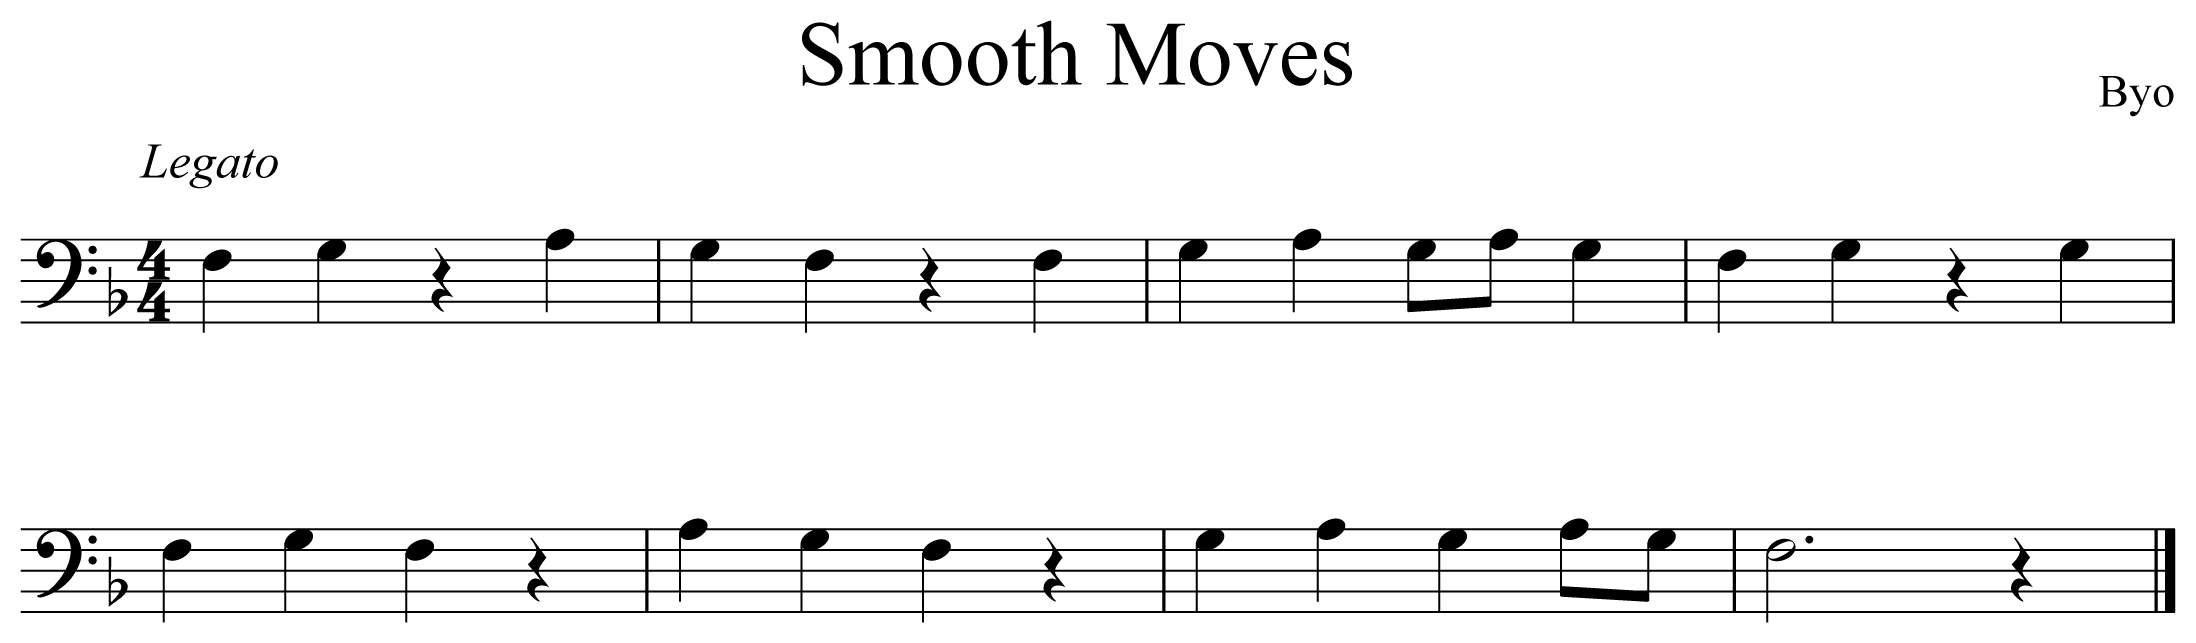 Smooth Moves Music Notation Euphonium